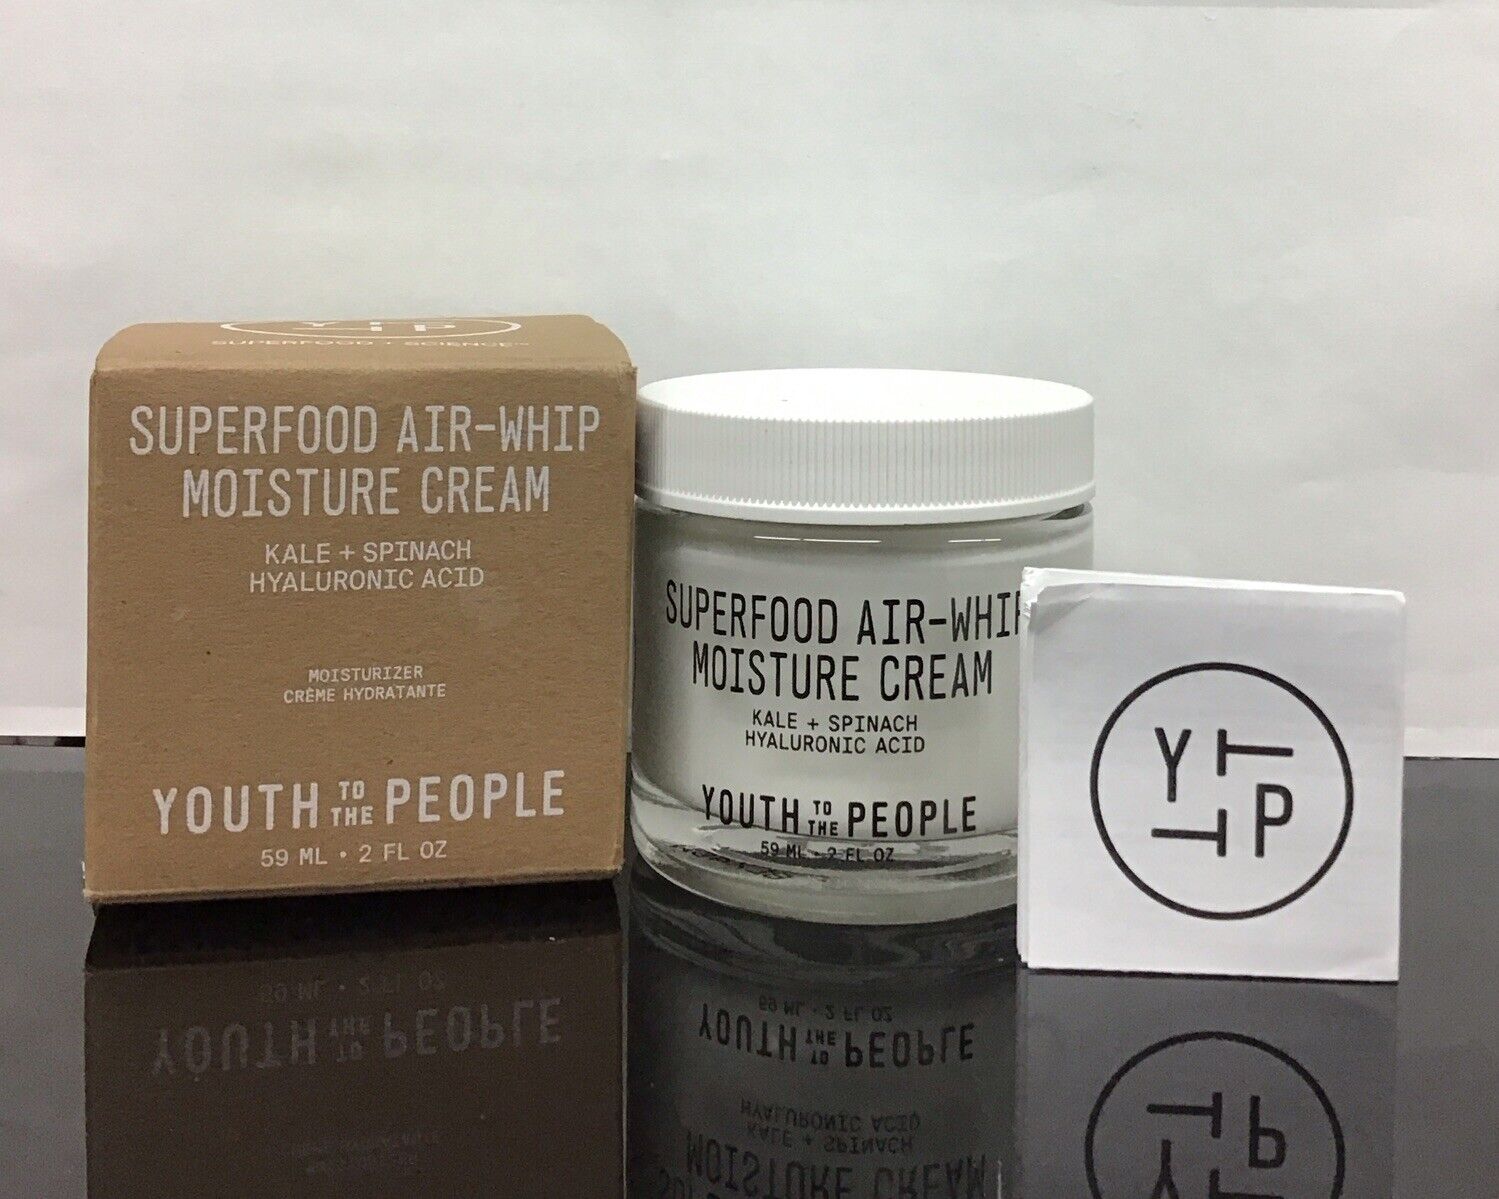 Youth To The People Superfood Air-Whip Moisture Cream 2 Fl Oz, As Pictured.